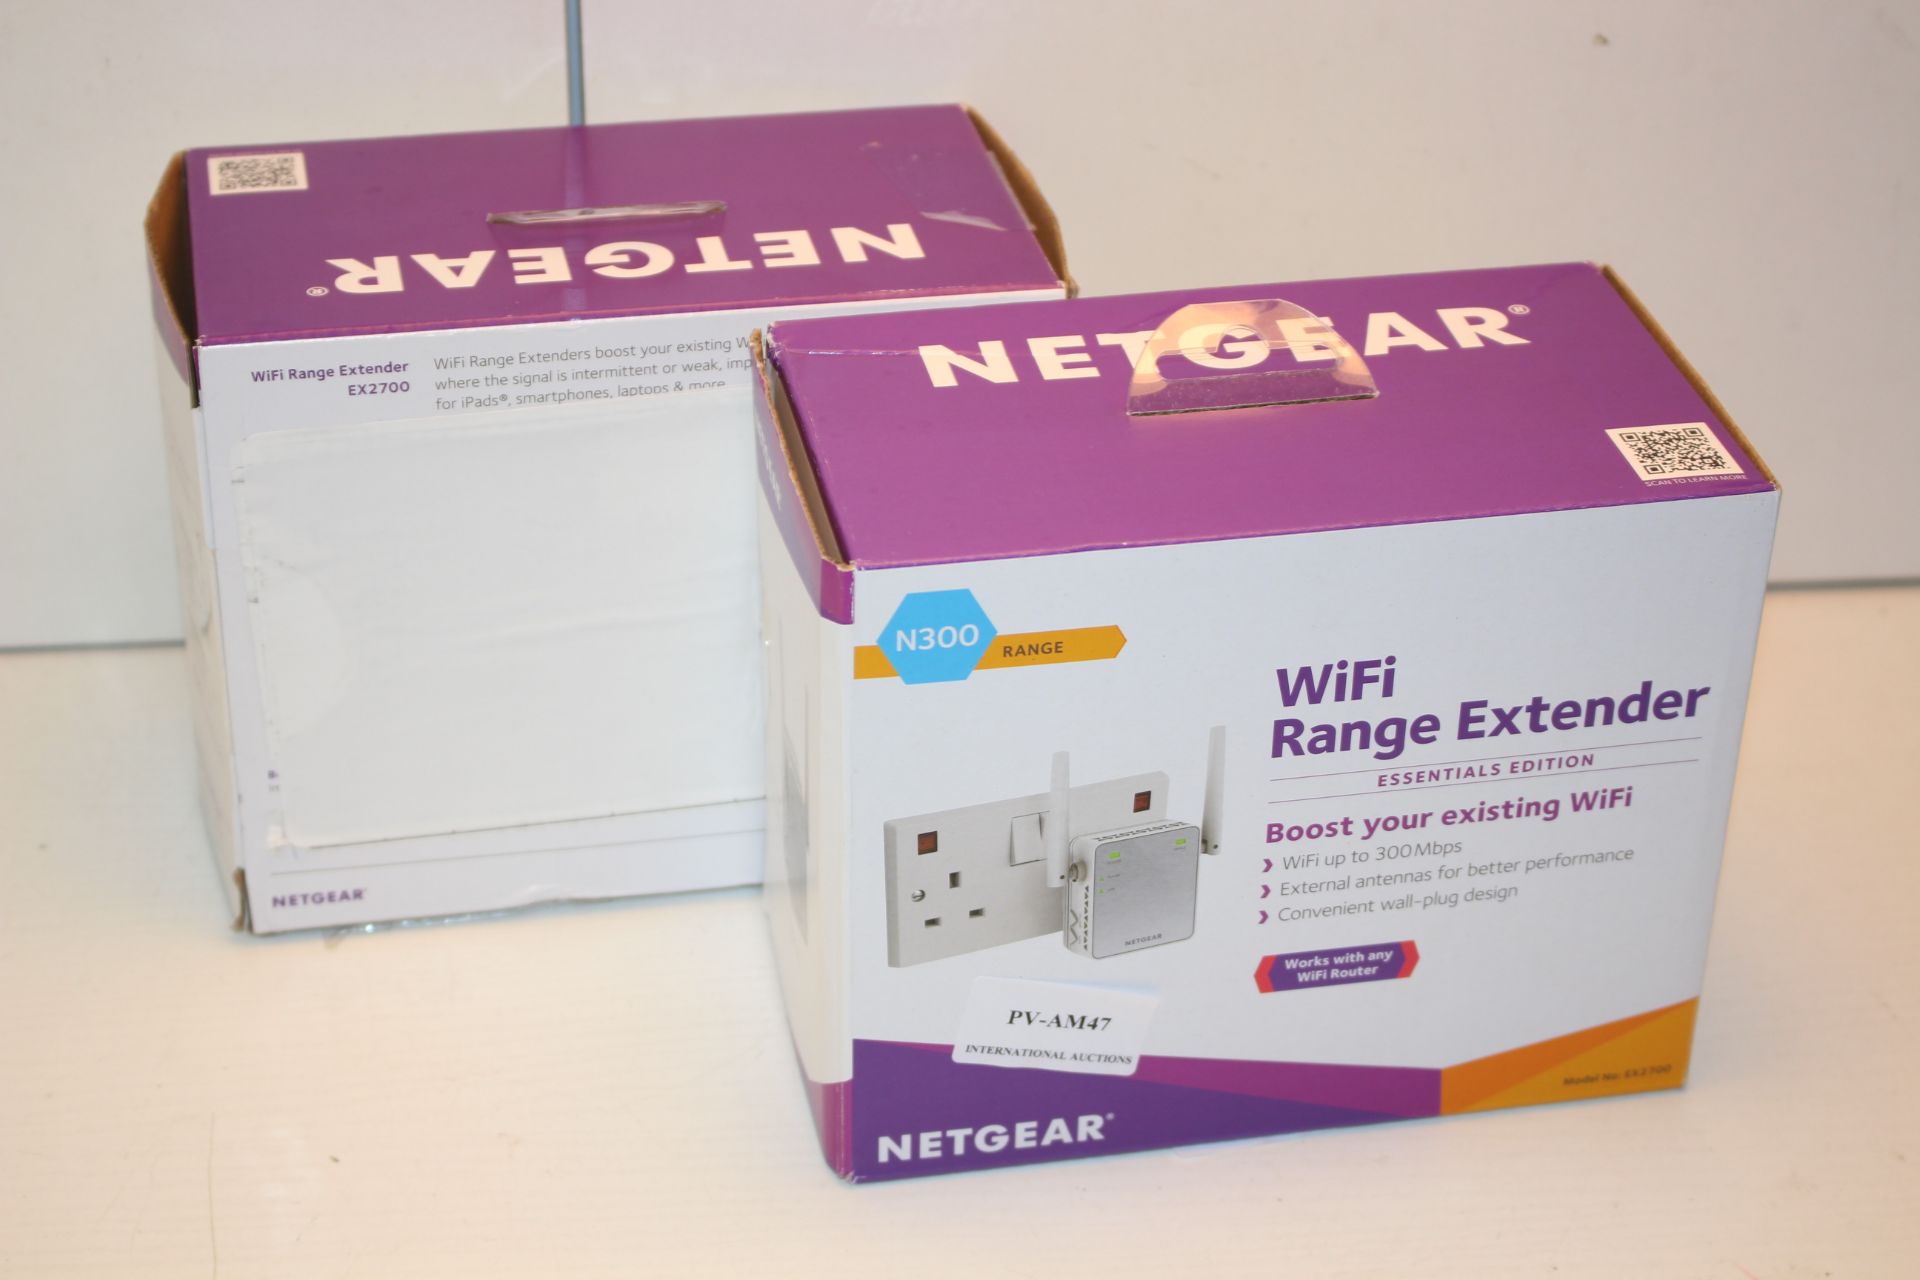 2X BOXED NETGEAR WIFI RANGE EXTENDERS ESSENTIALS EDITION COMBINED RRP £80.00Condition